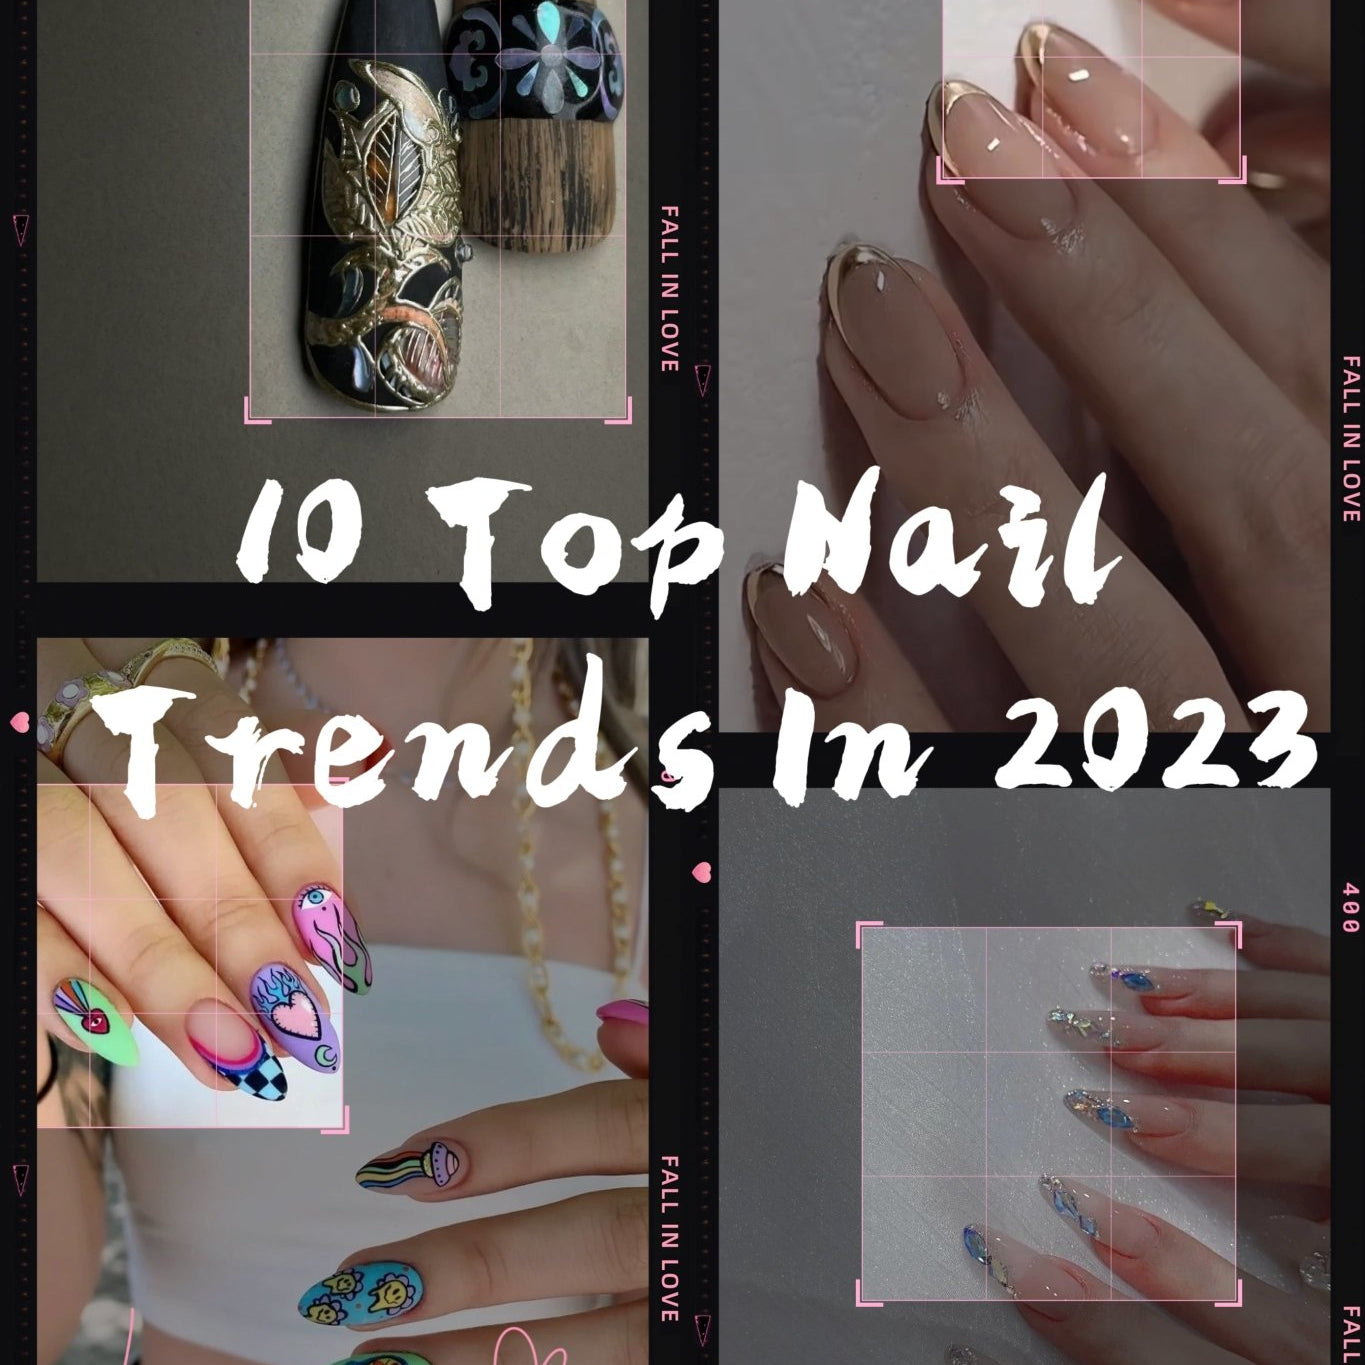 10 Top Nail Trends In 2023 To Refresh Your Nails - MIEAP